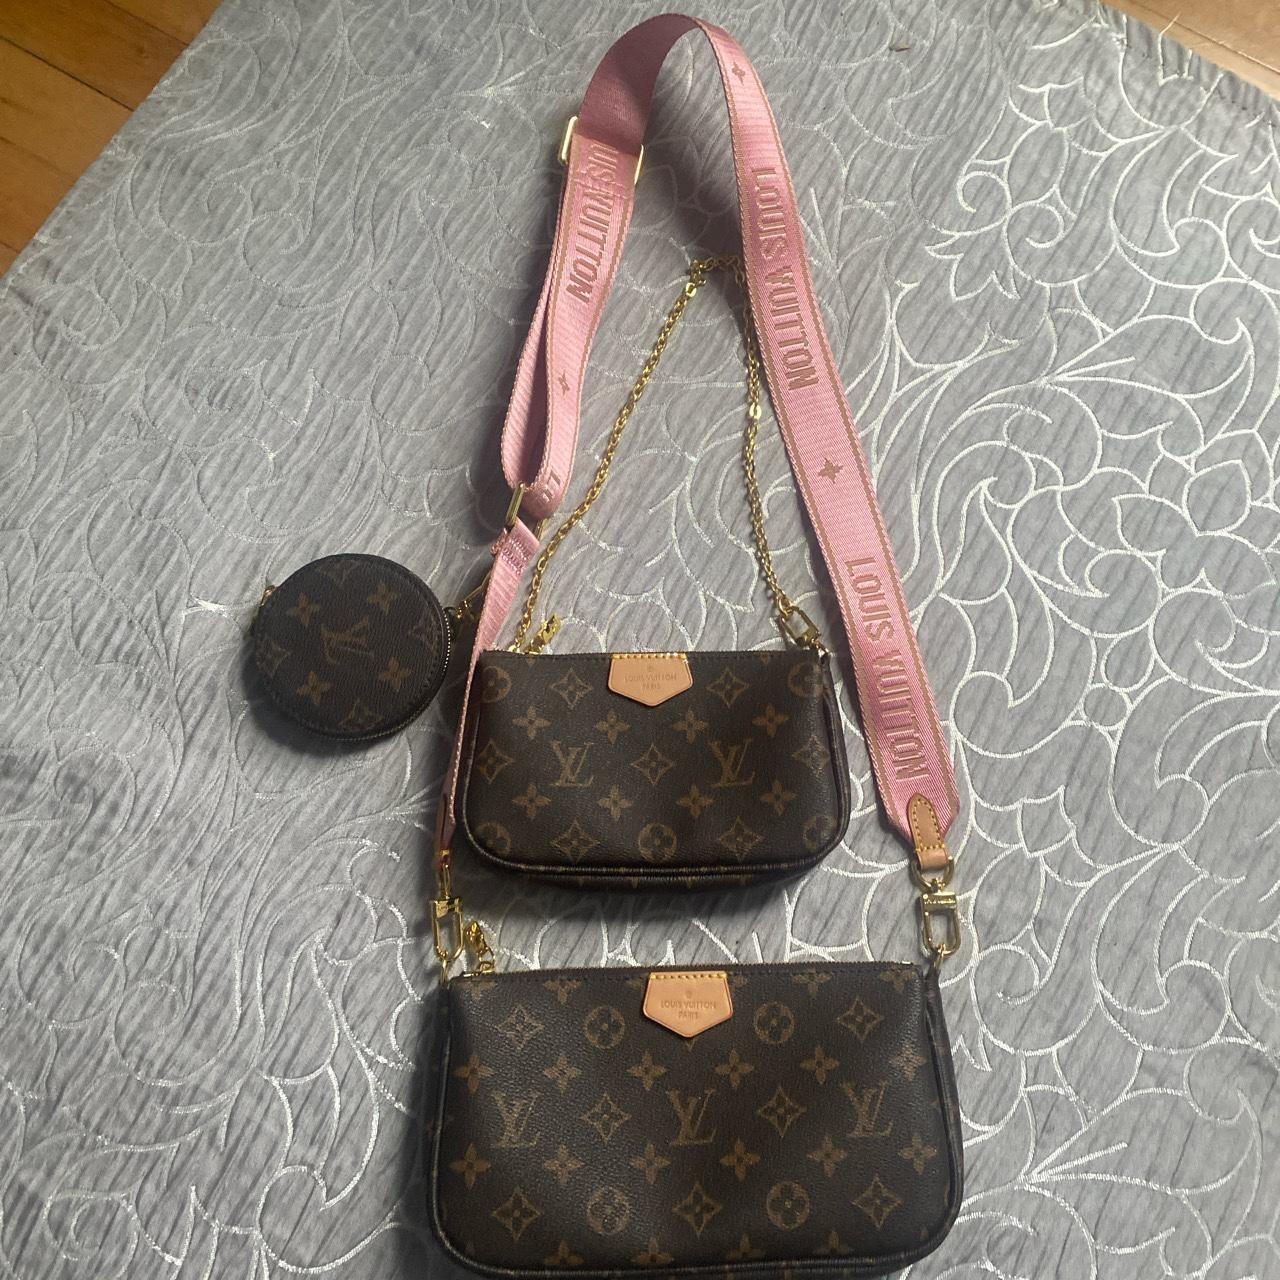 Cute LV set, highly recommend as a gift text me for - Depop